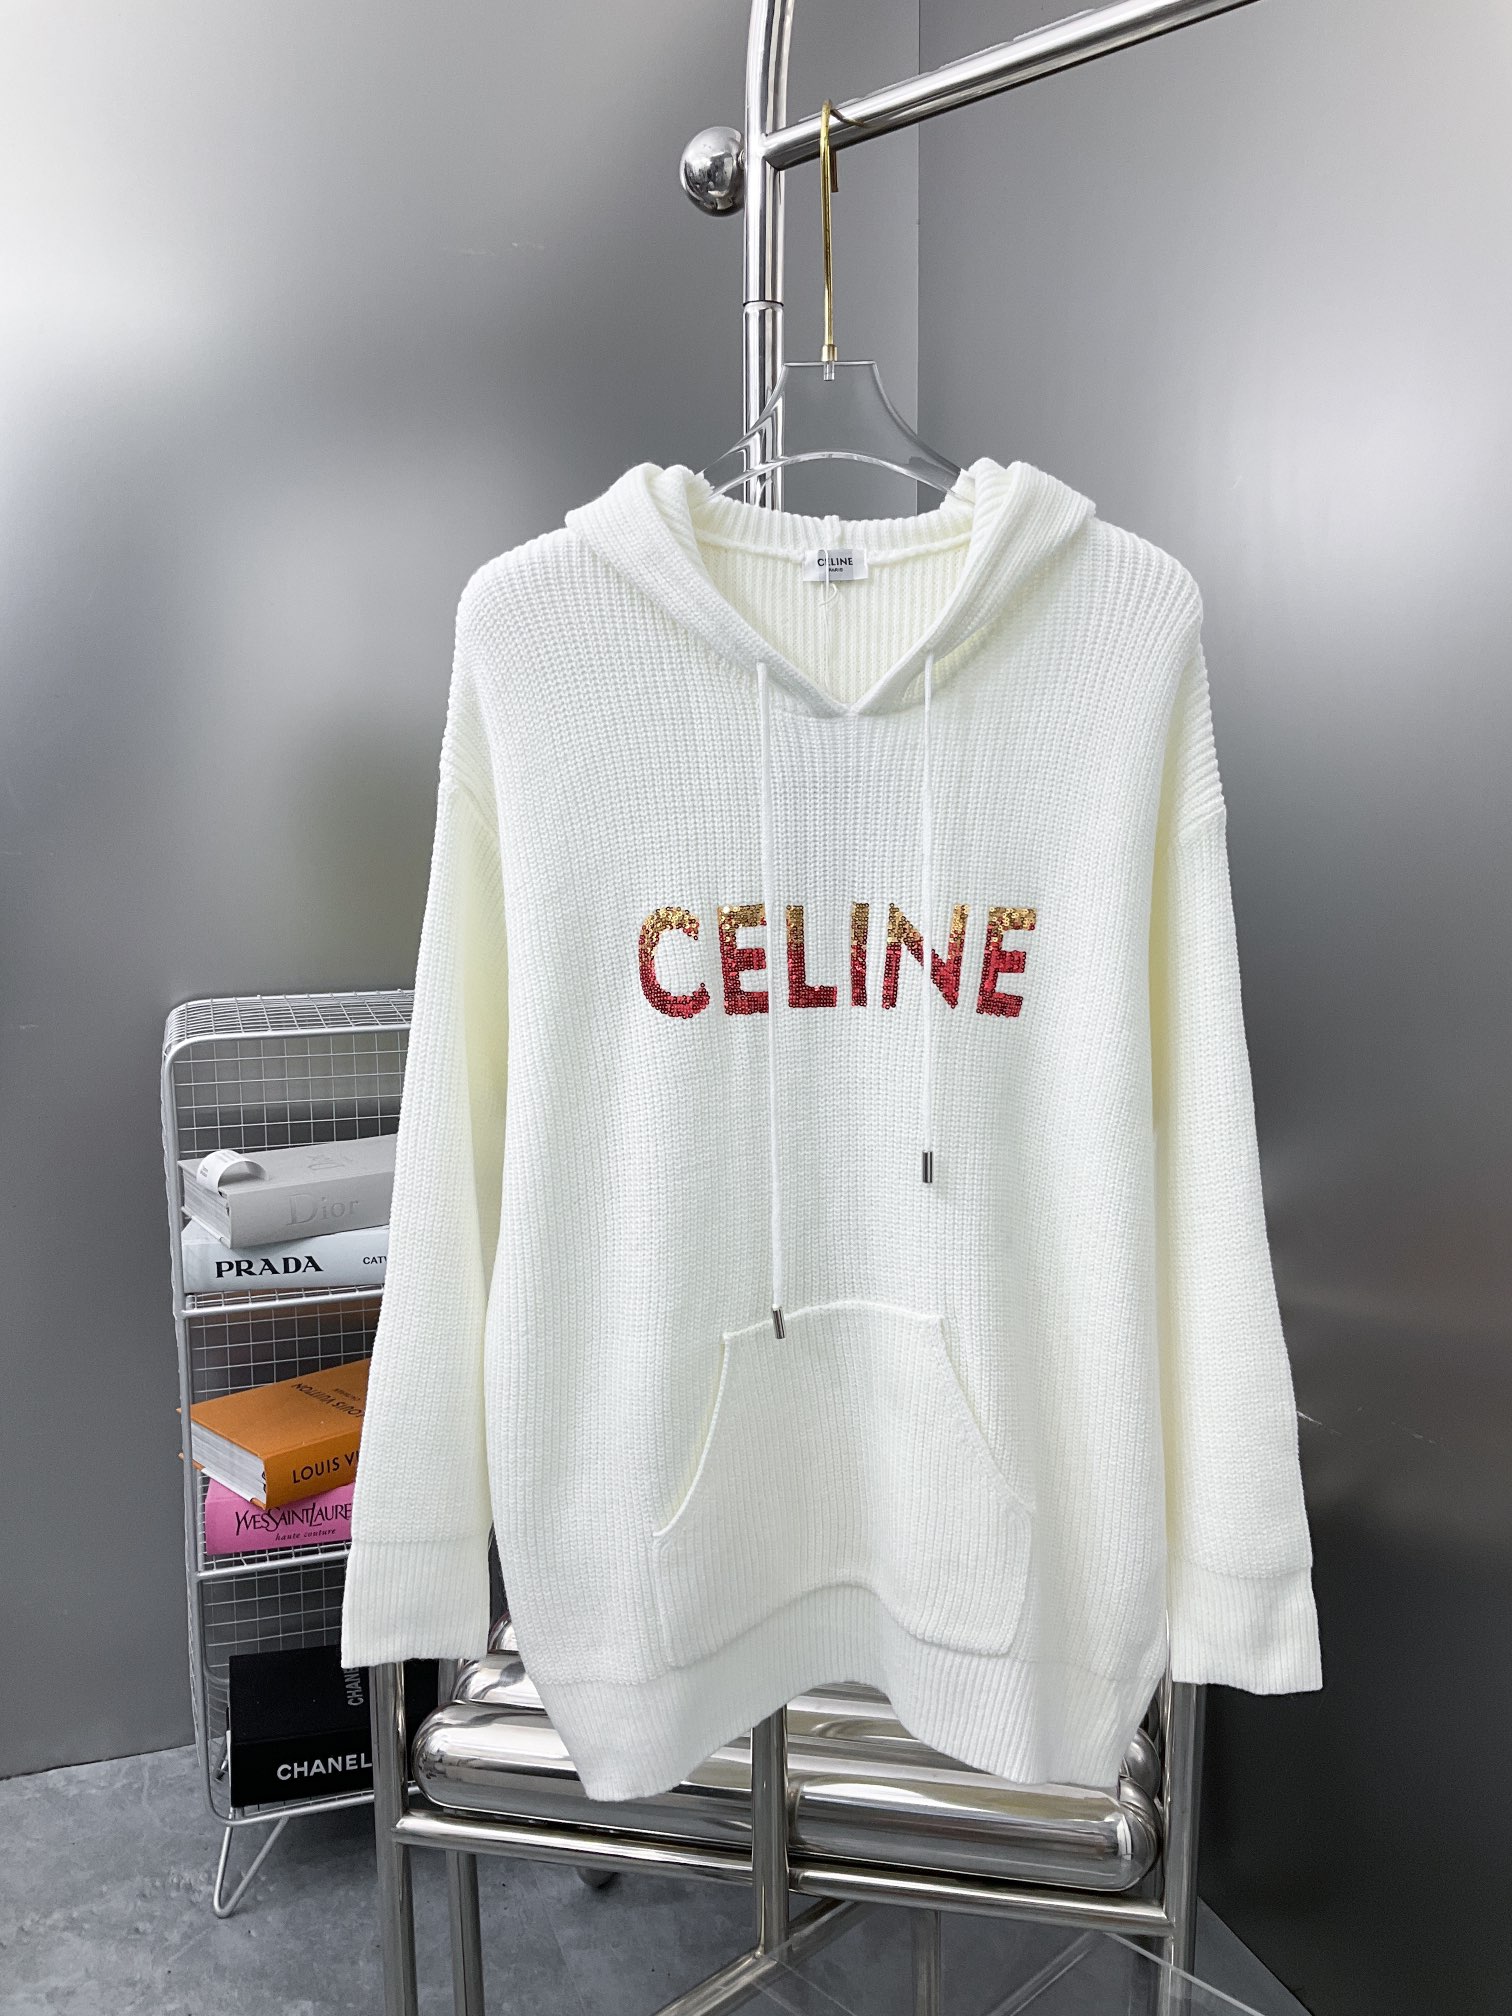 Celine 7 Star
 Clothing Sweatshirts Knitting Fall Collection Hooded Top